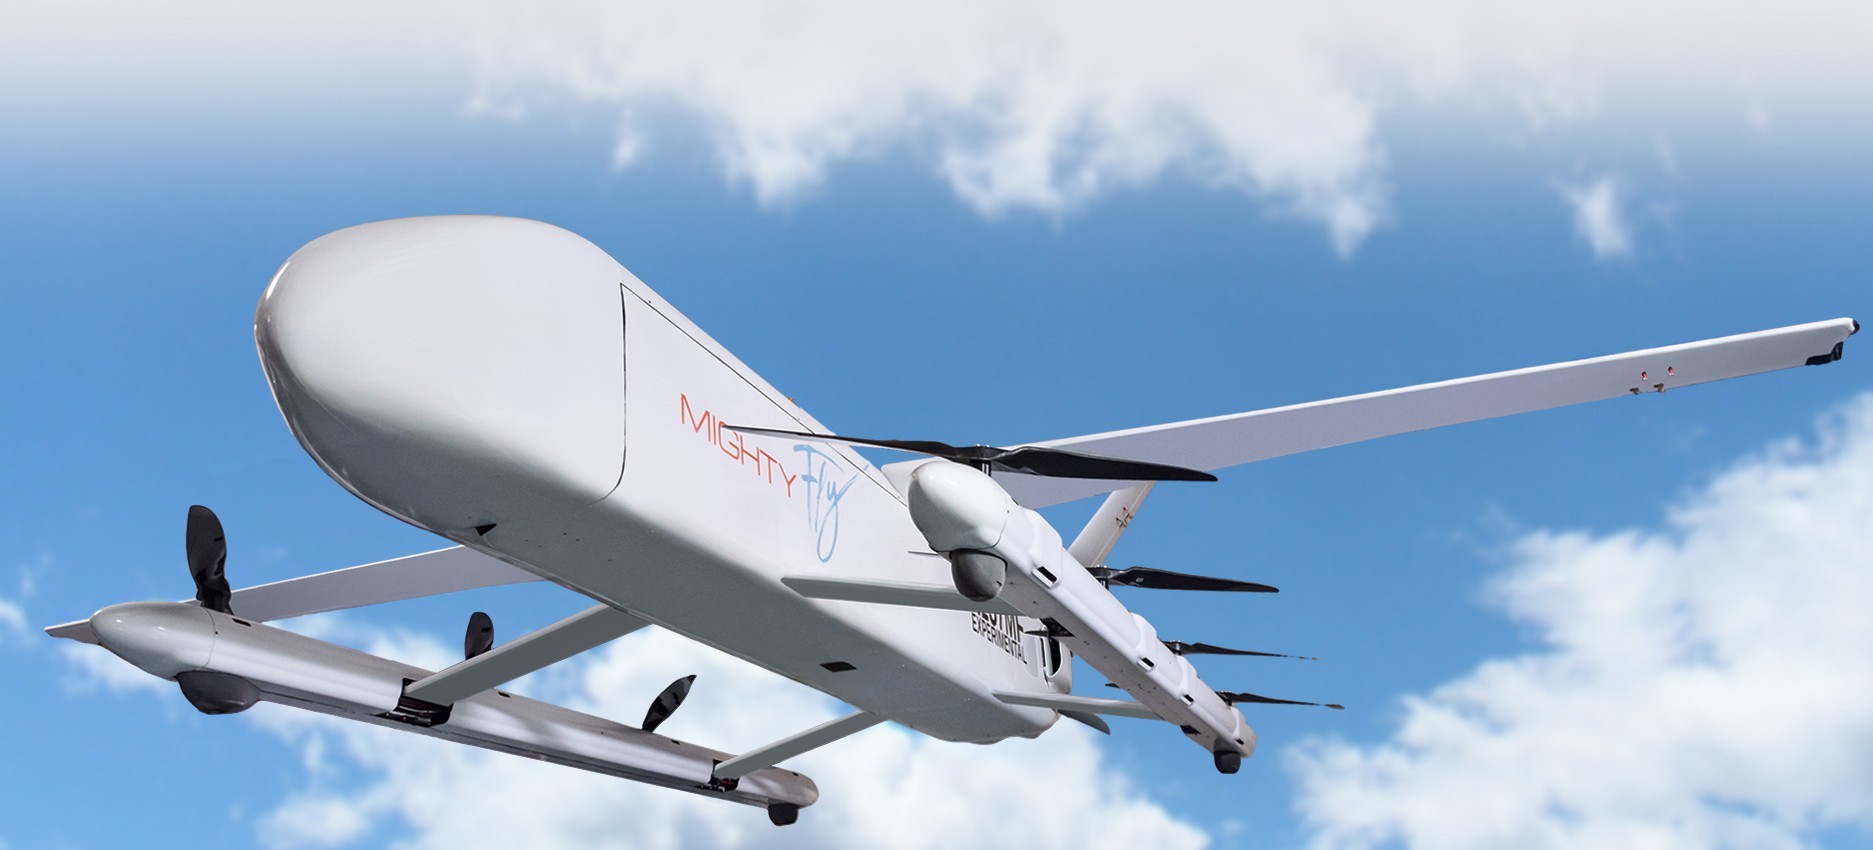 The drone, which has a range of up to 1,000 kilometers, transports goods on its own